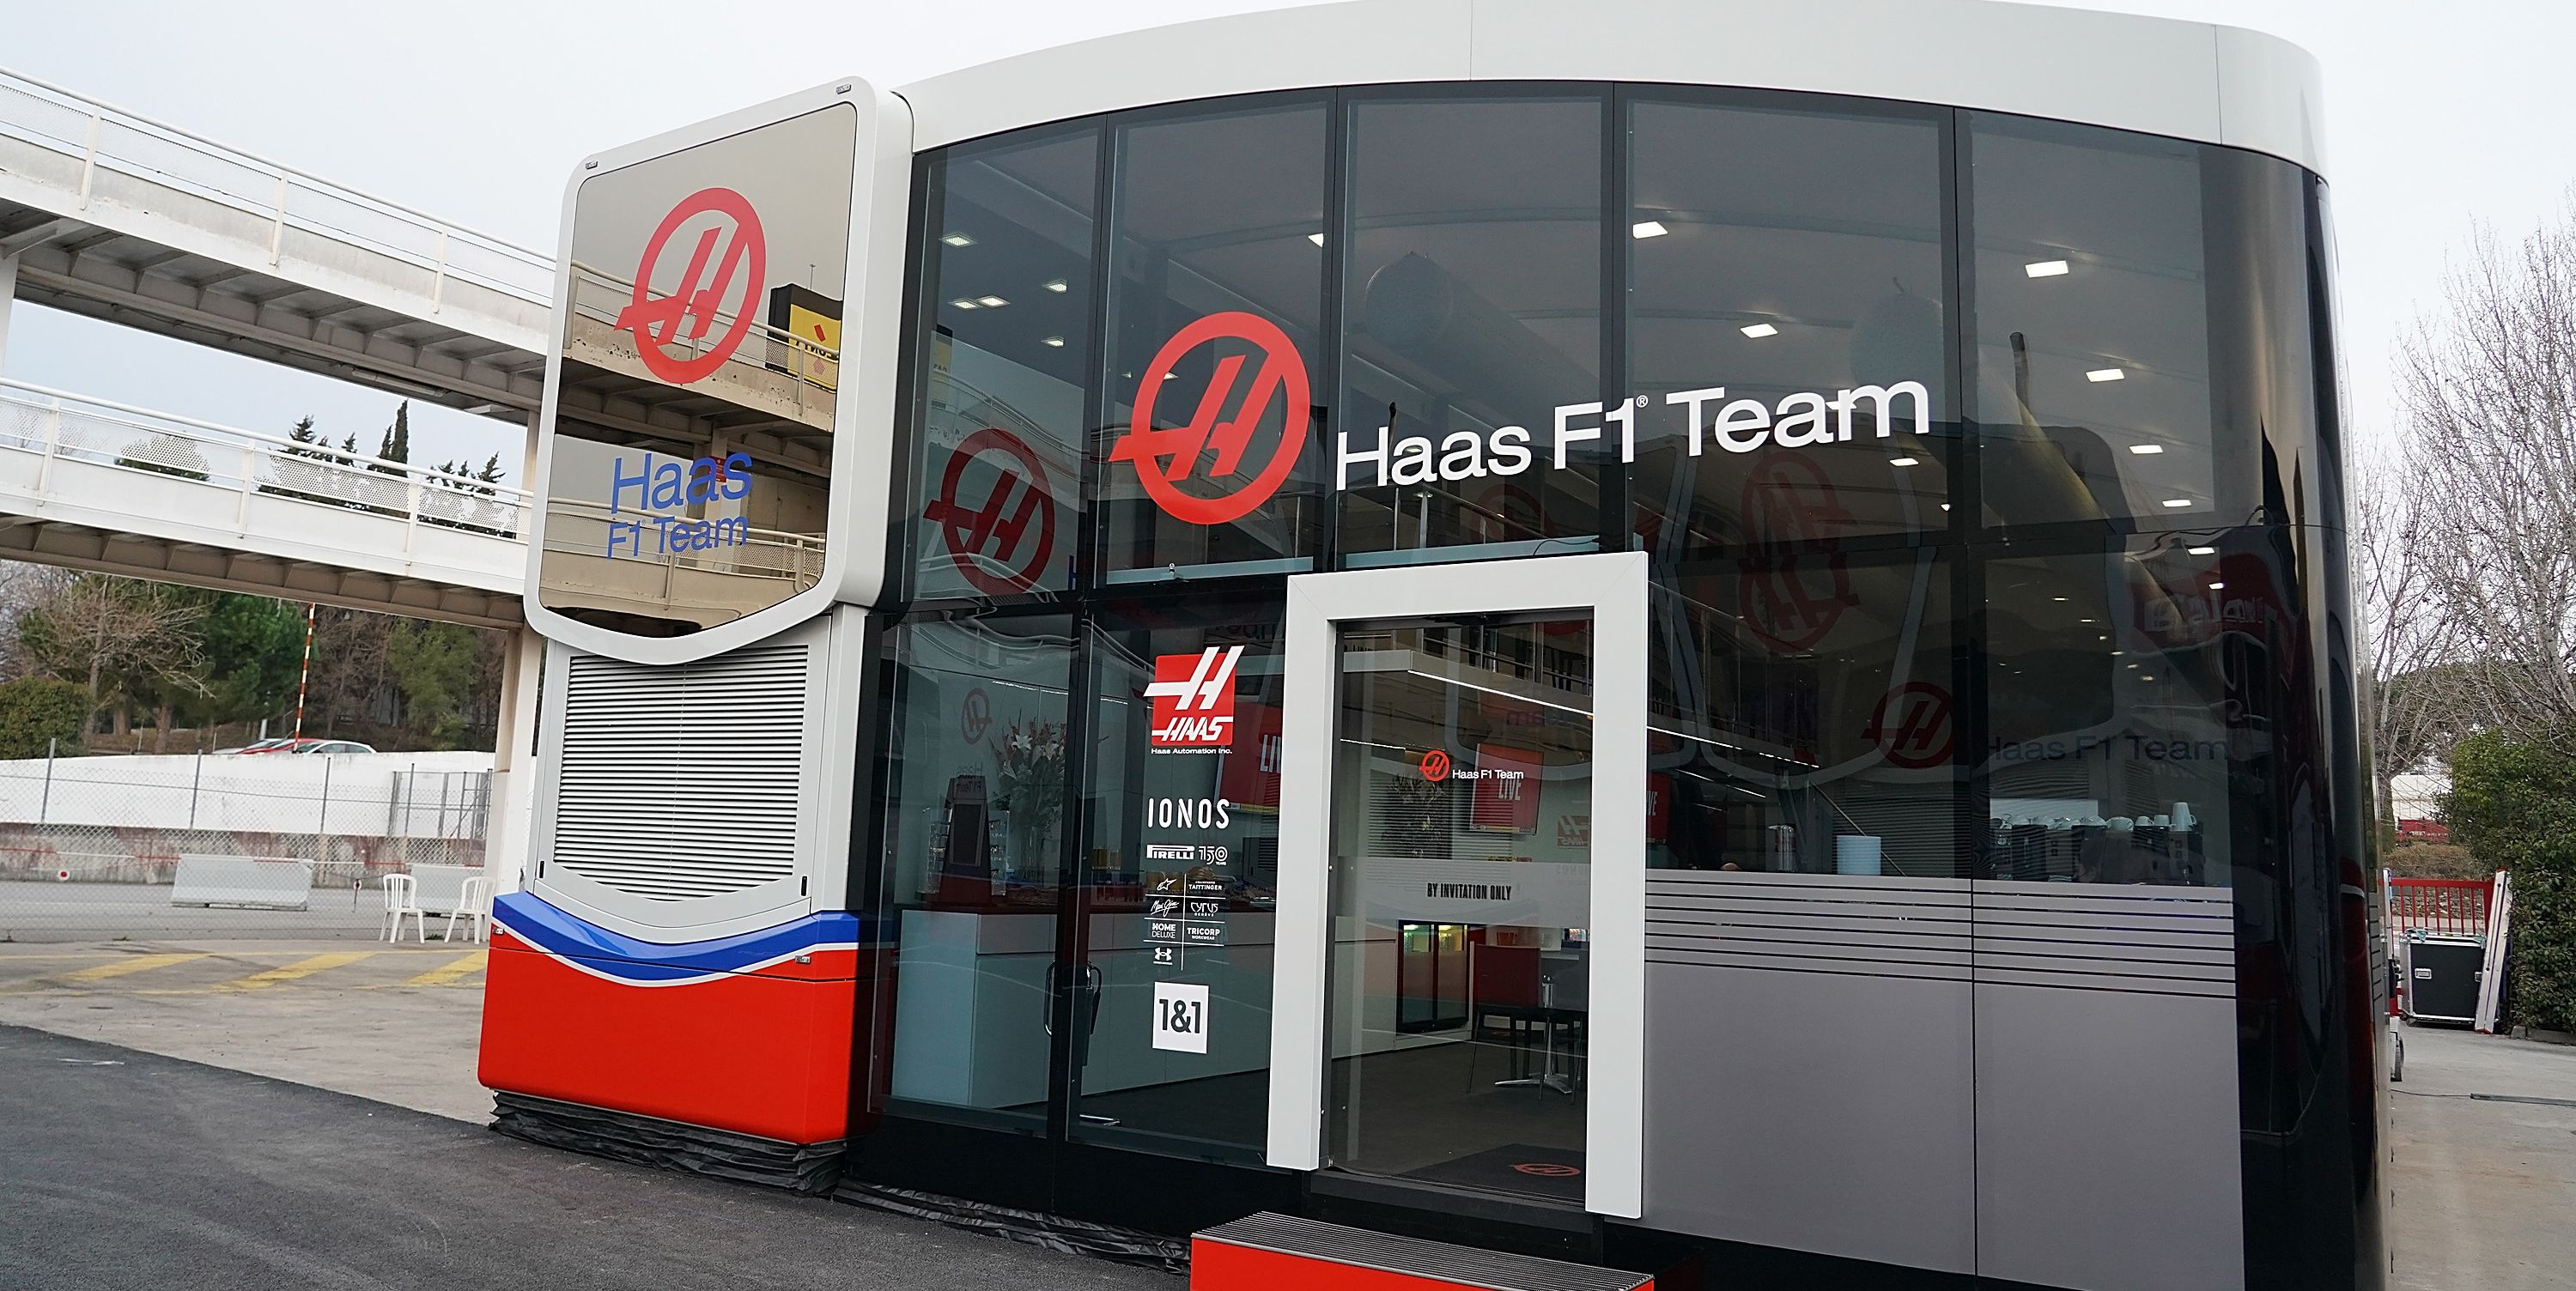 Haas F1 Has a Golden Opportunity to Make an Exciting Hire